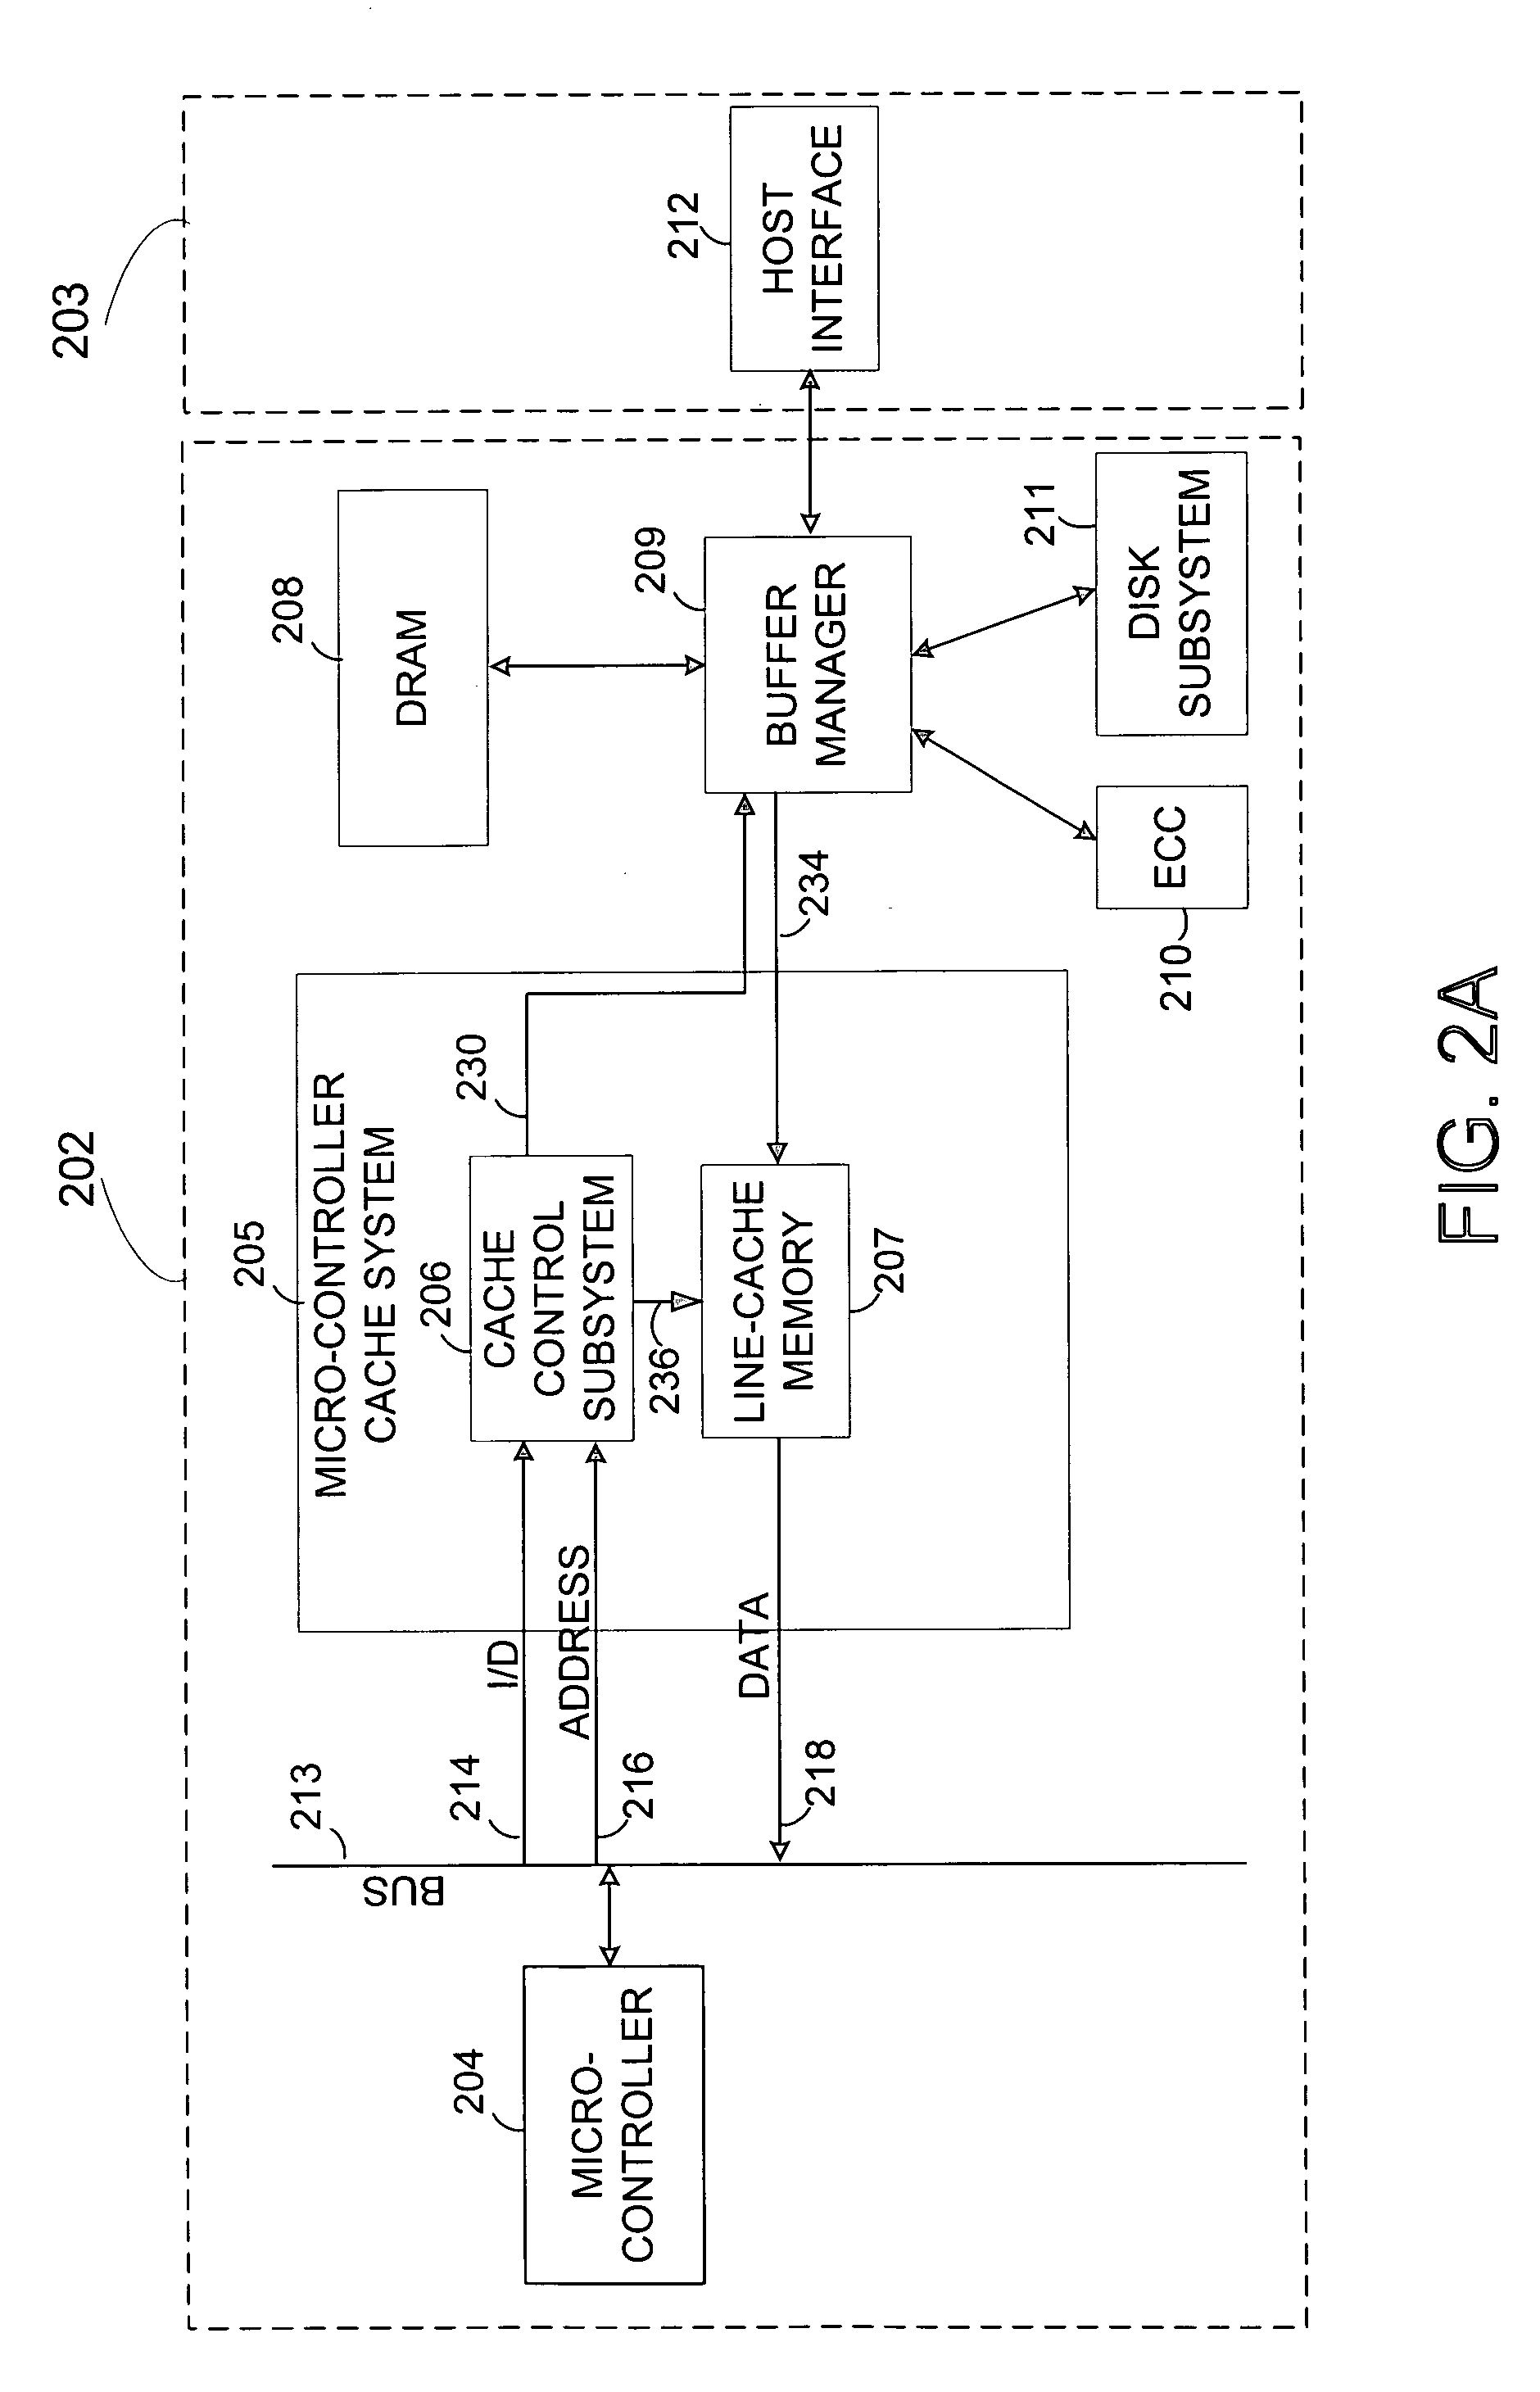 Reducing micro-controller access time to data stored in a remote memory in a disk drive control system